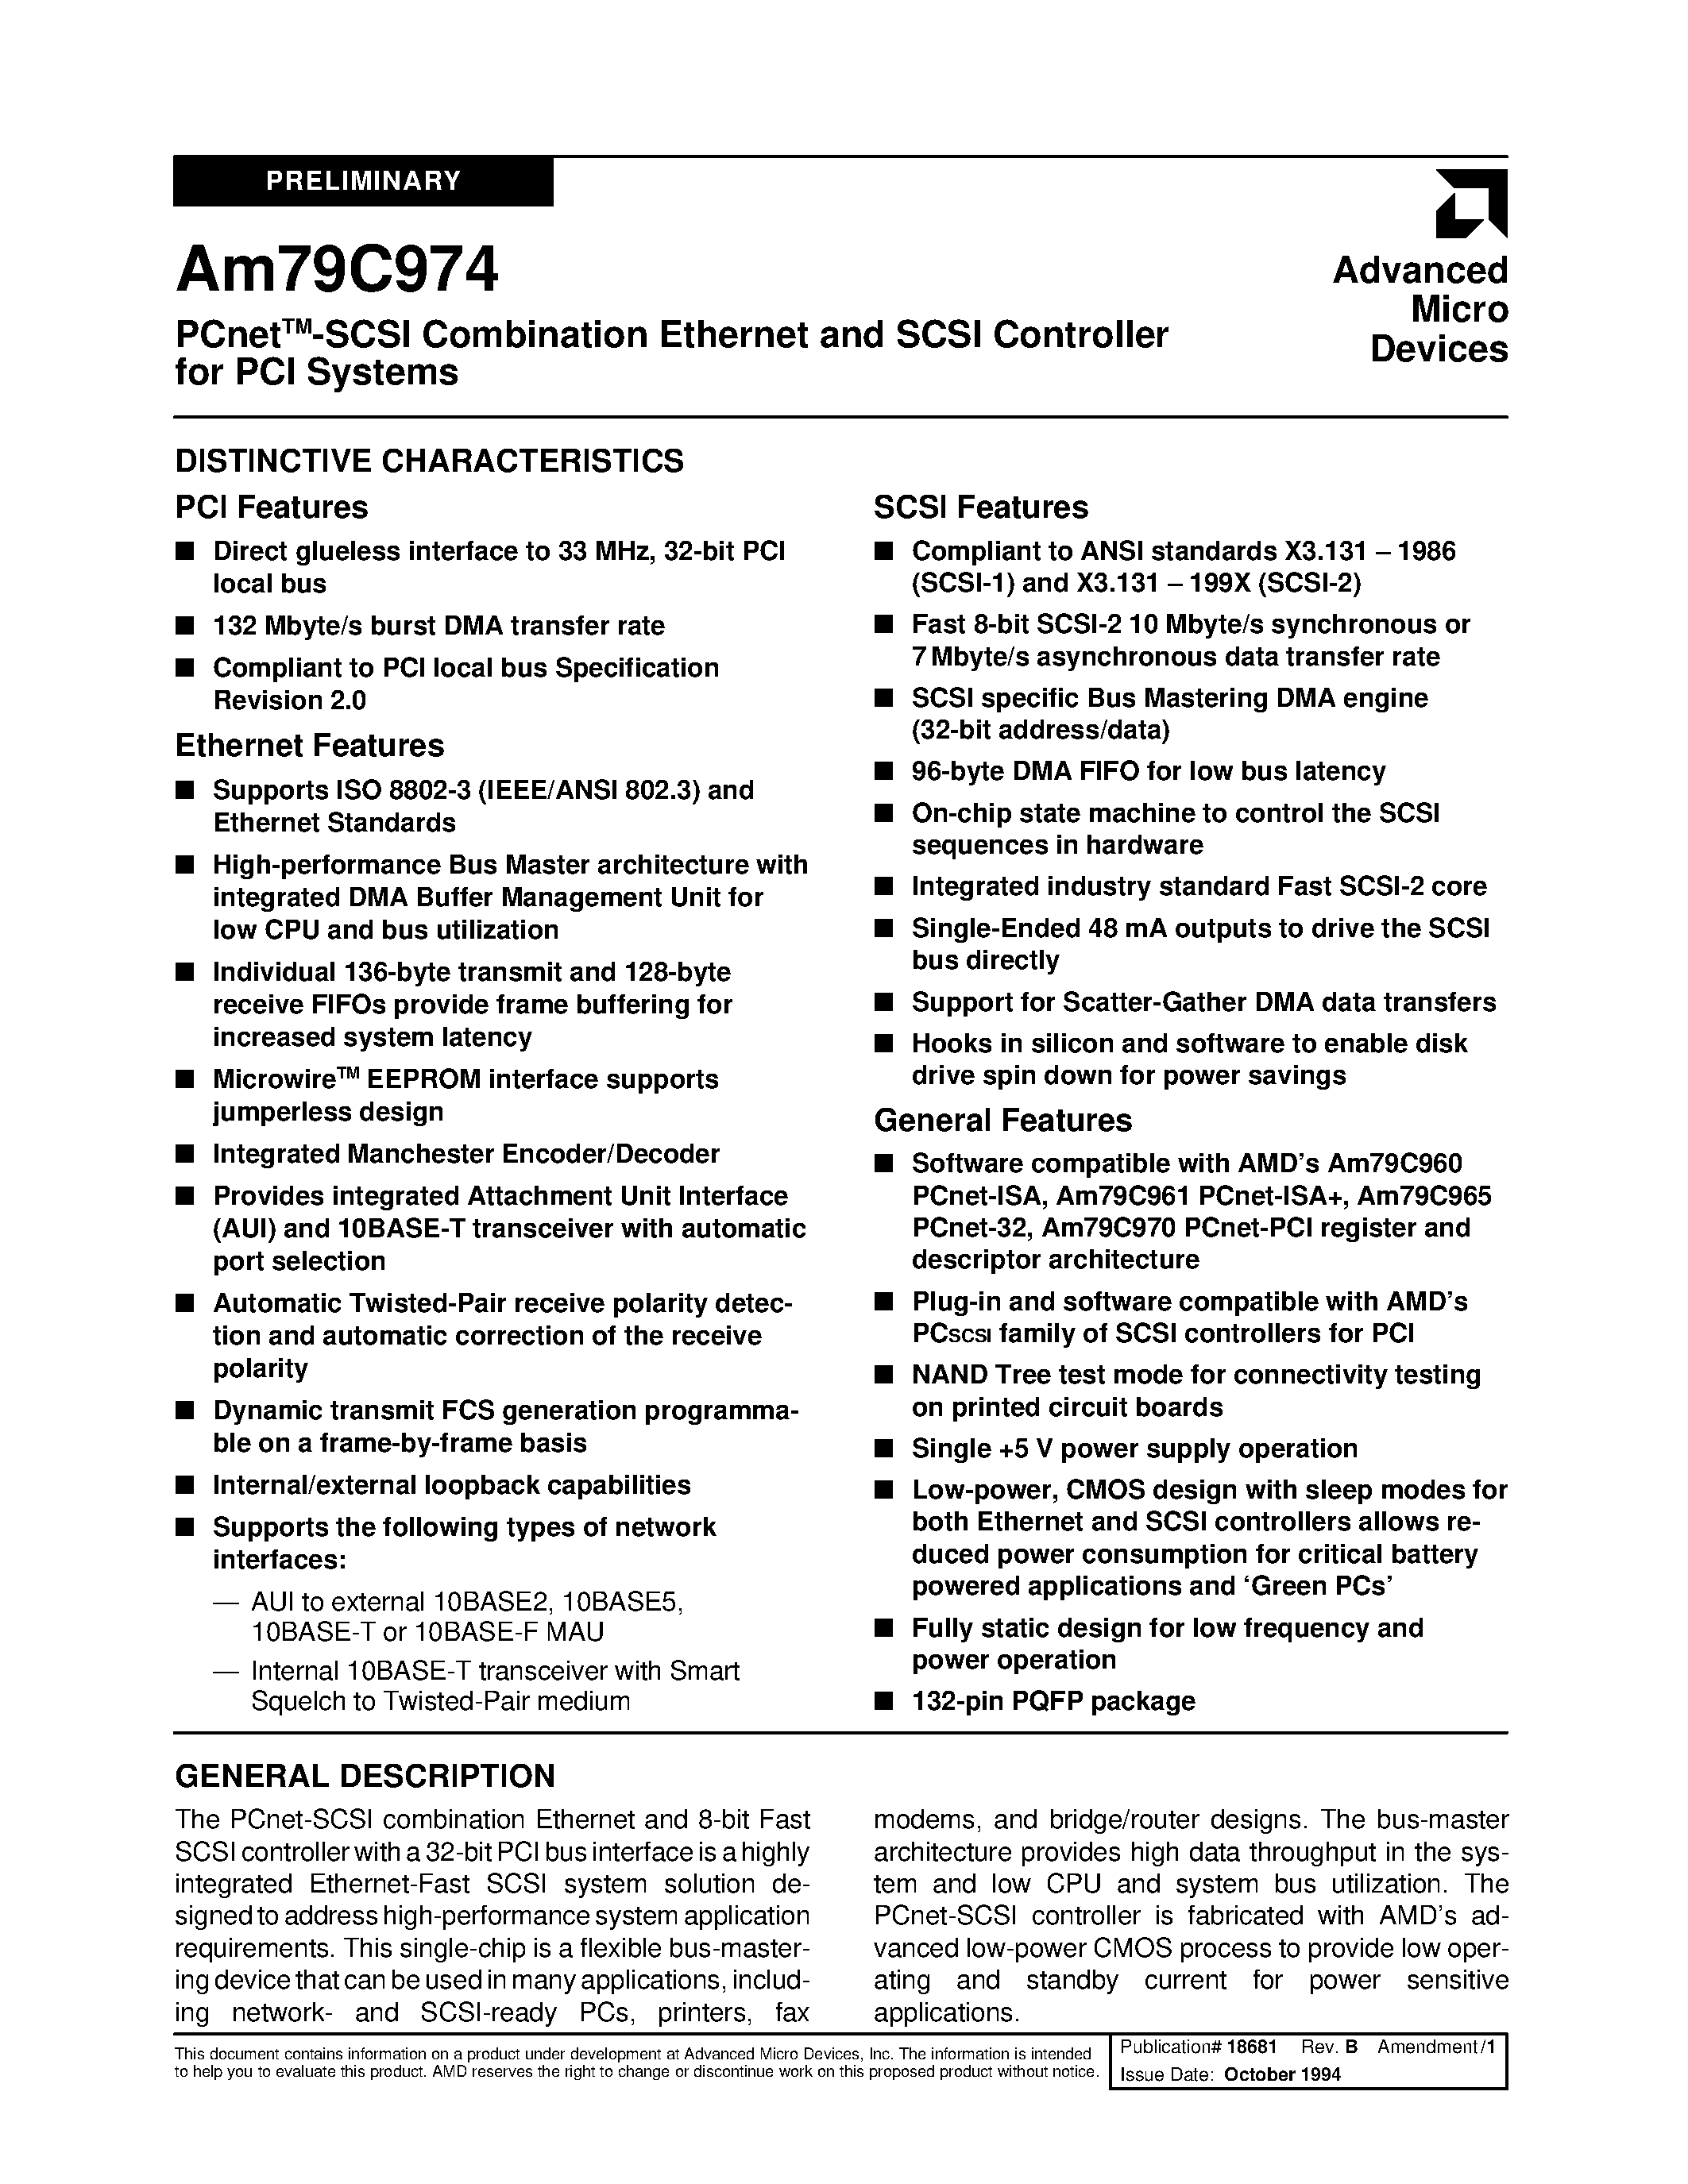 Datasheet AM79C974KCW - PCnetTM-SCSI Combination Ethernet and SCSI Controller for PCI Systems page 1